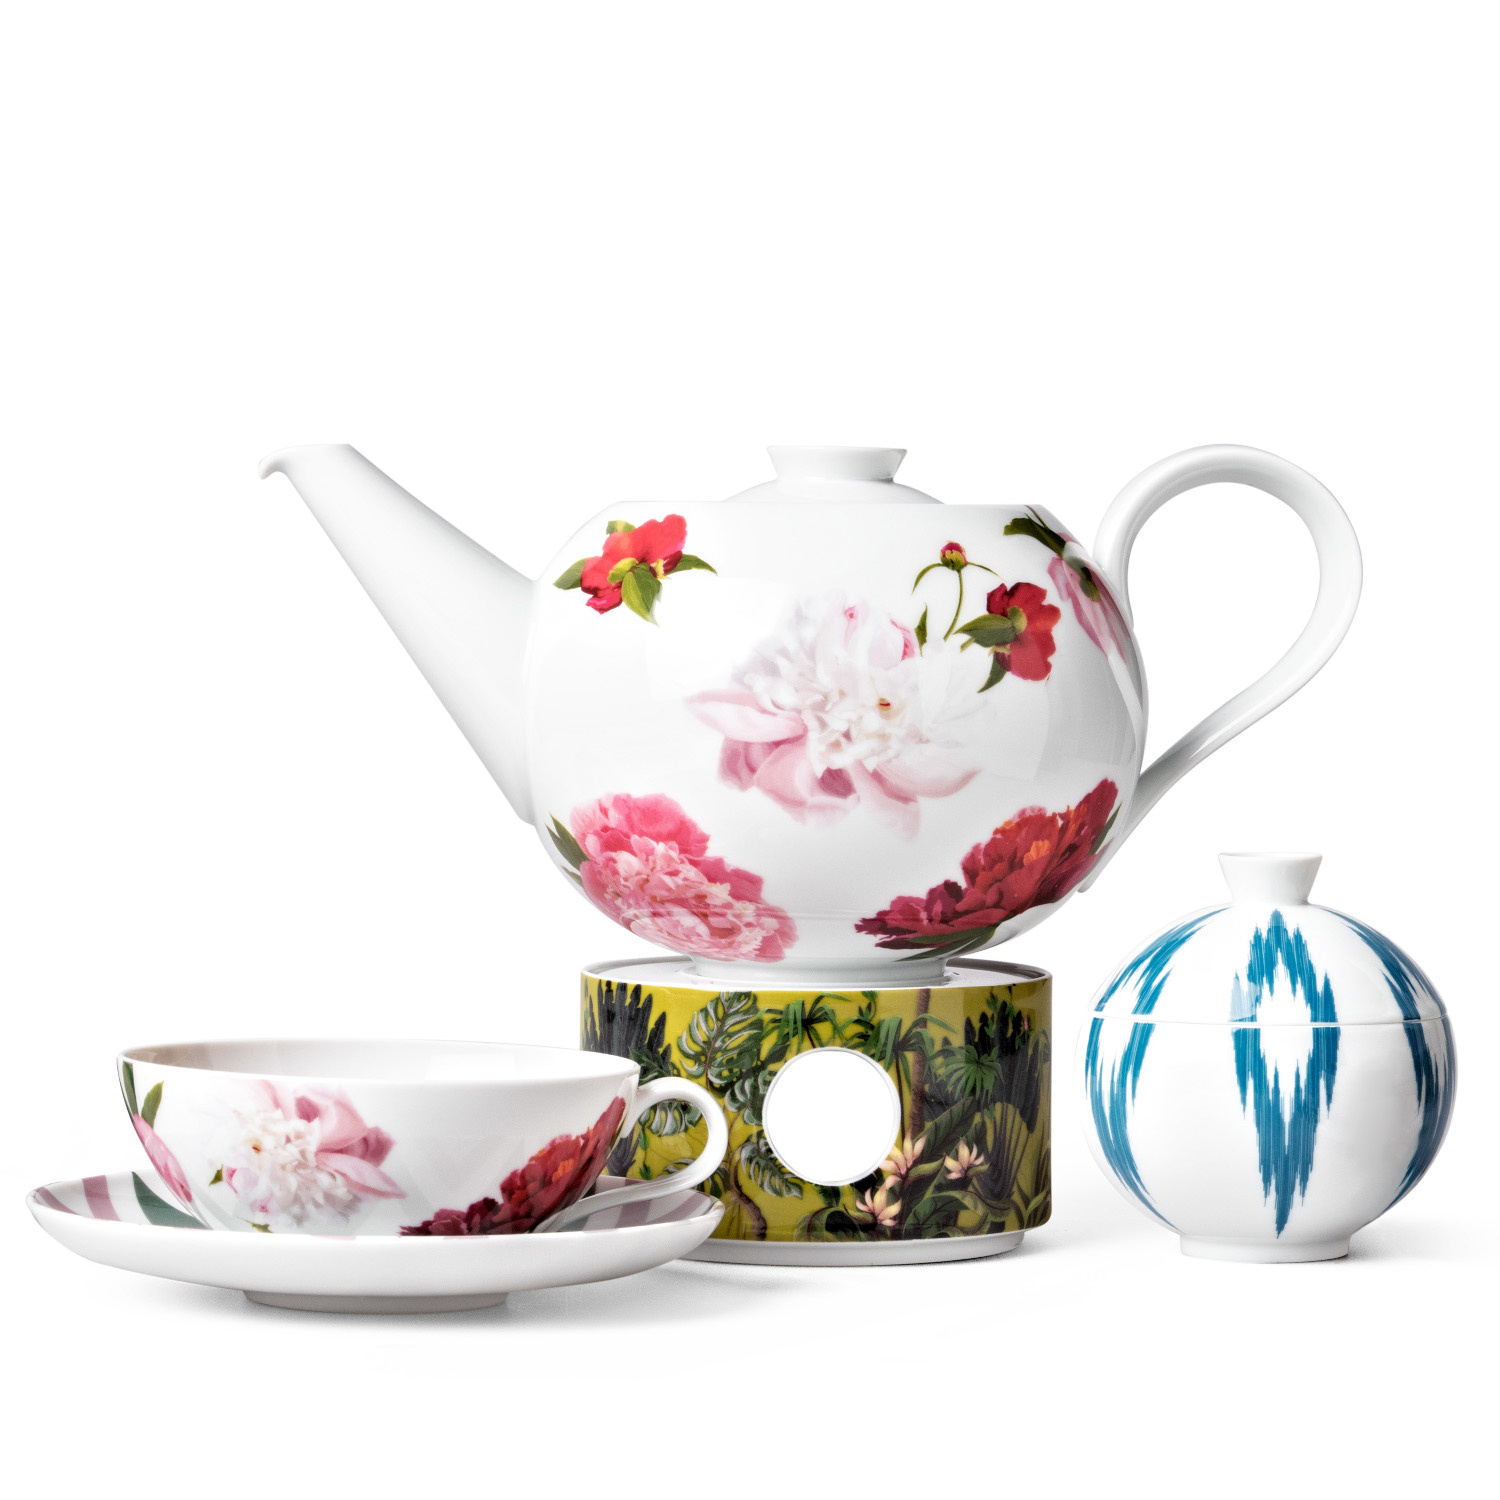 Sieger by Furstenberg Universal Saucer My China! Collection Paraiso